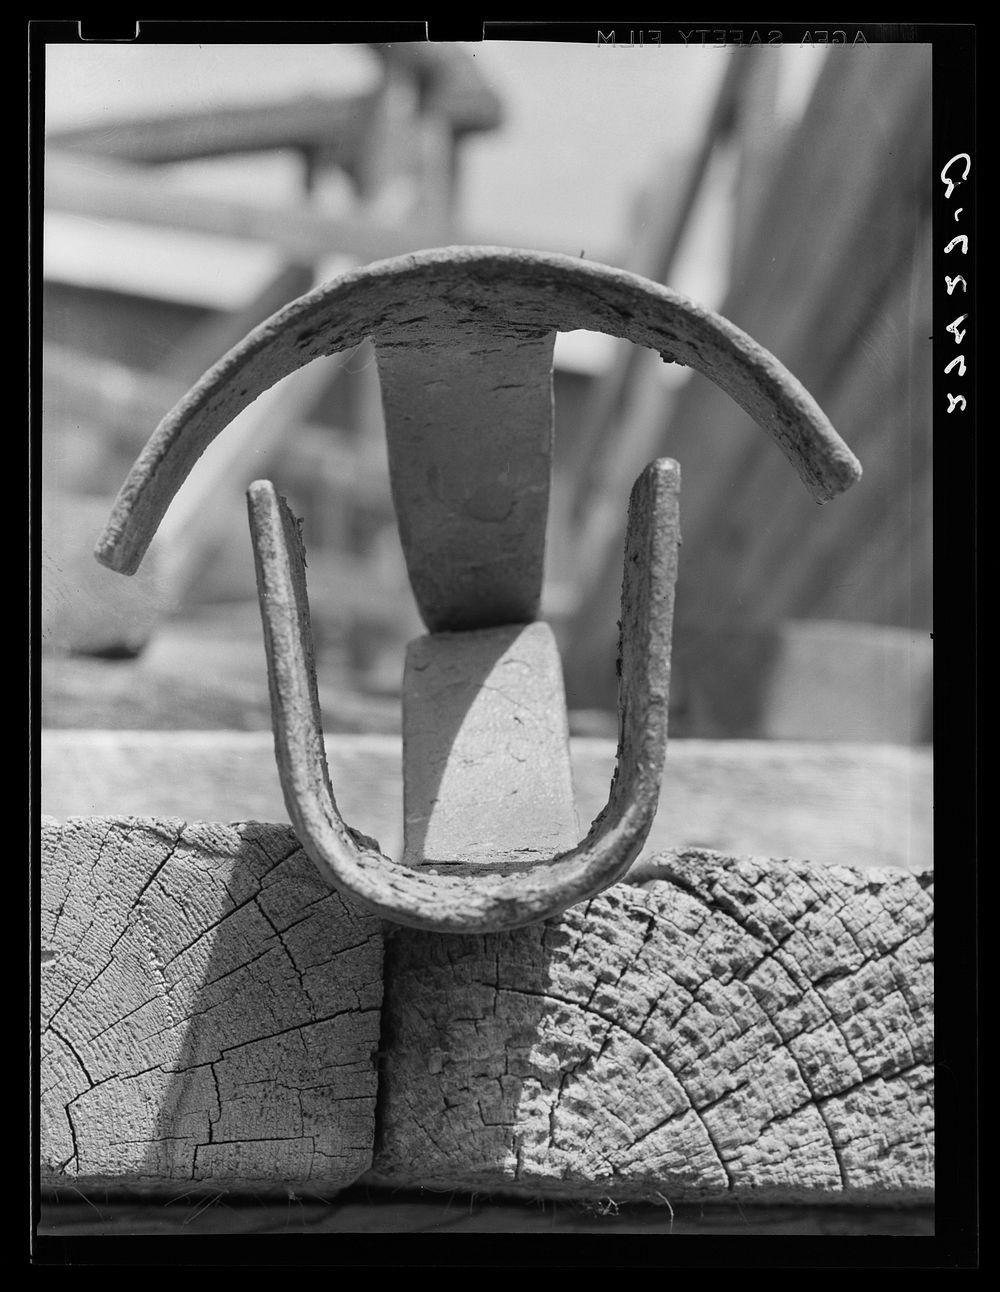 Branding iron used on Quarter Circle 'U' Ranch. Montana. Sourced from the Library of Congress.